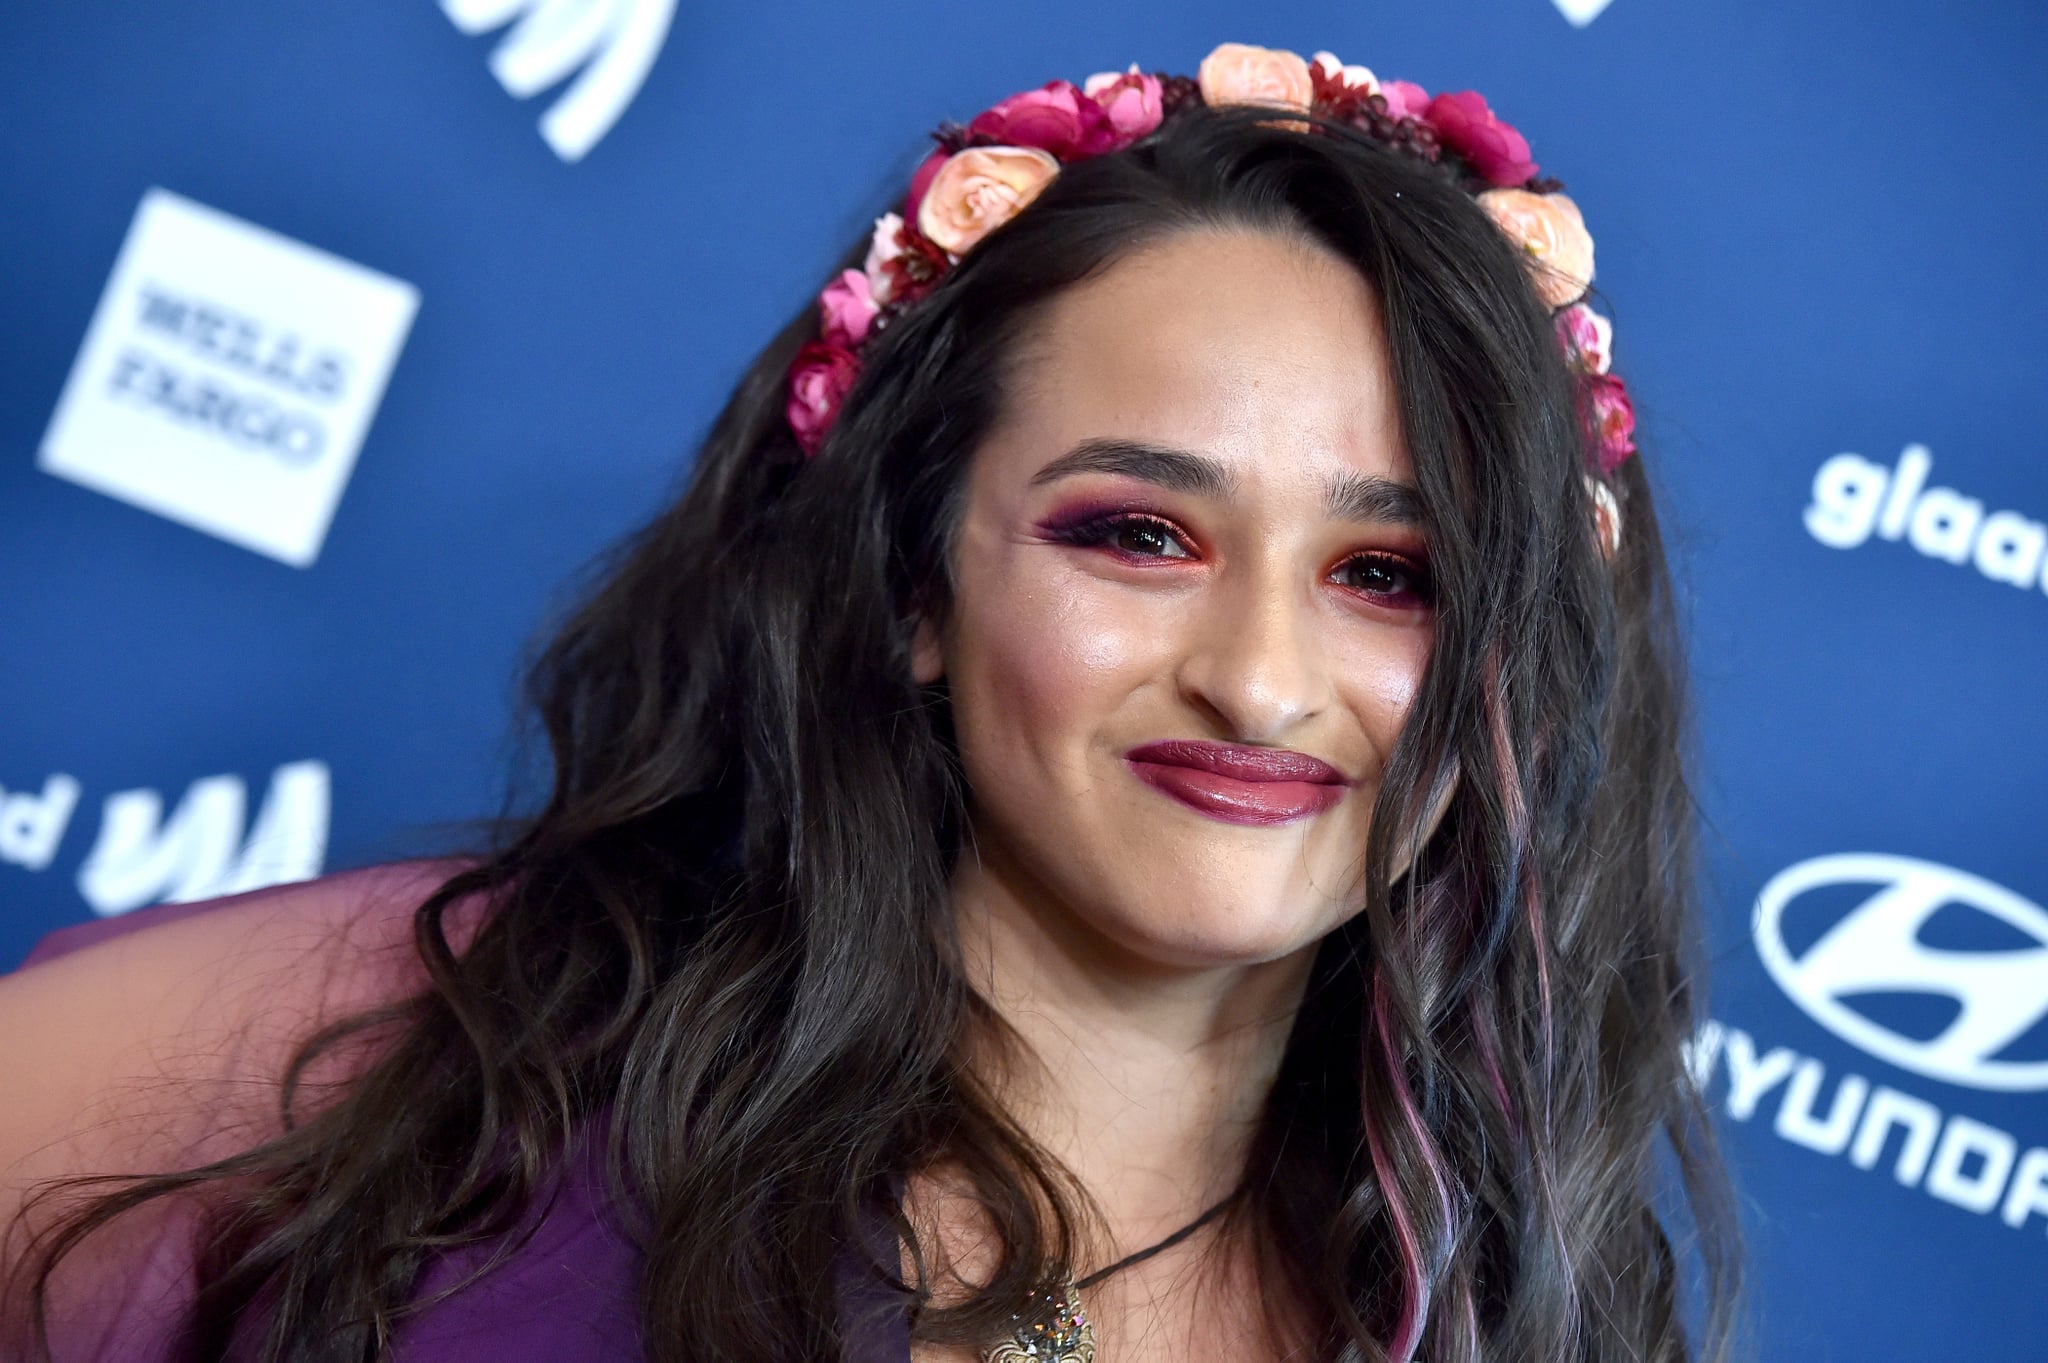 All About Jazz Jennings: Height, Weight, Bio, and More